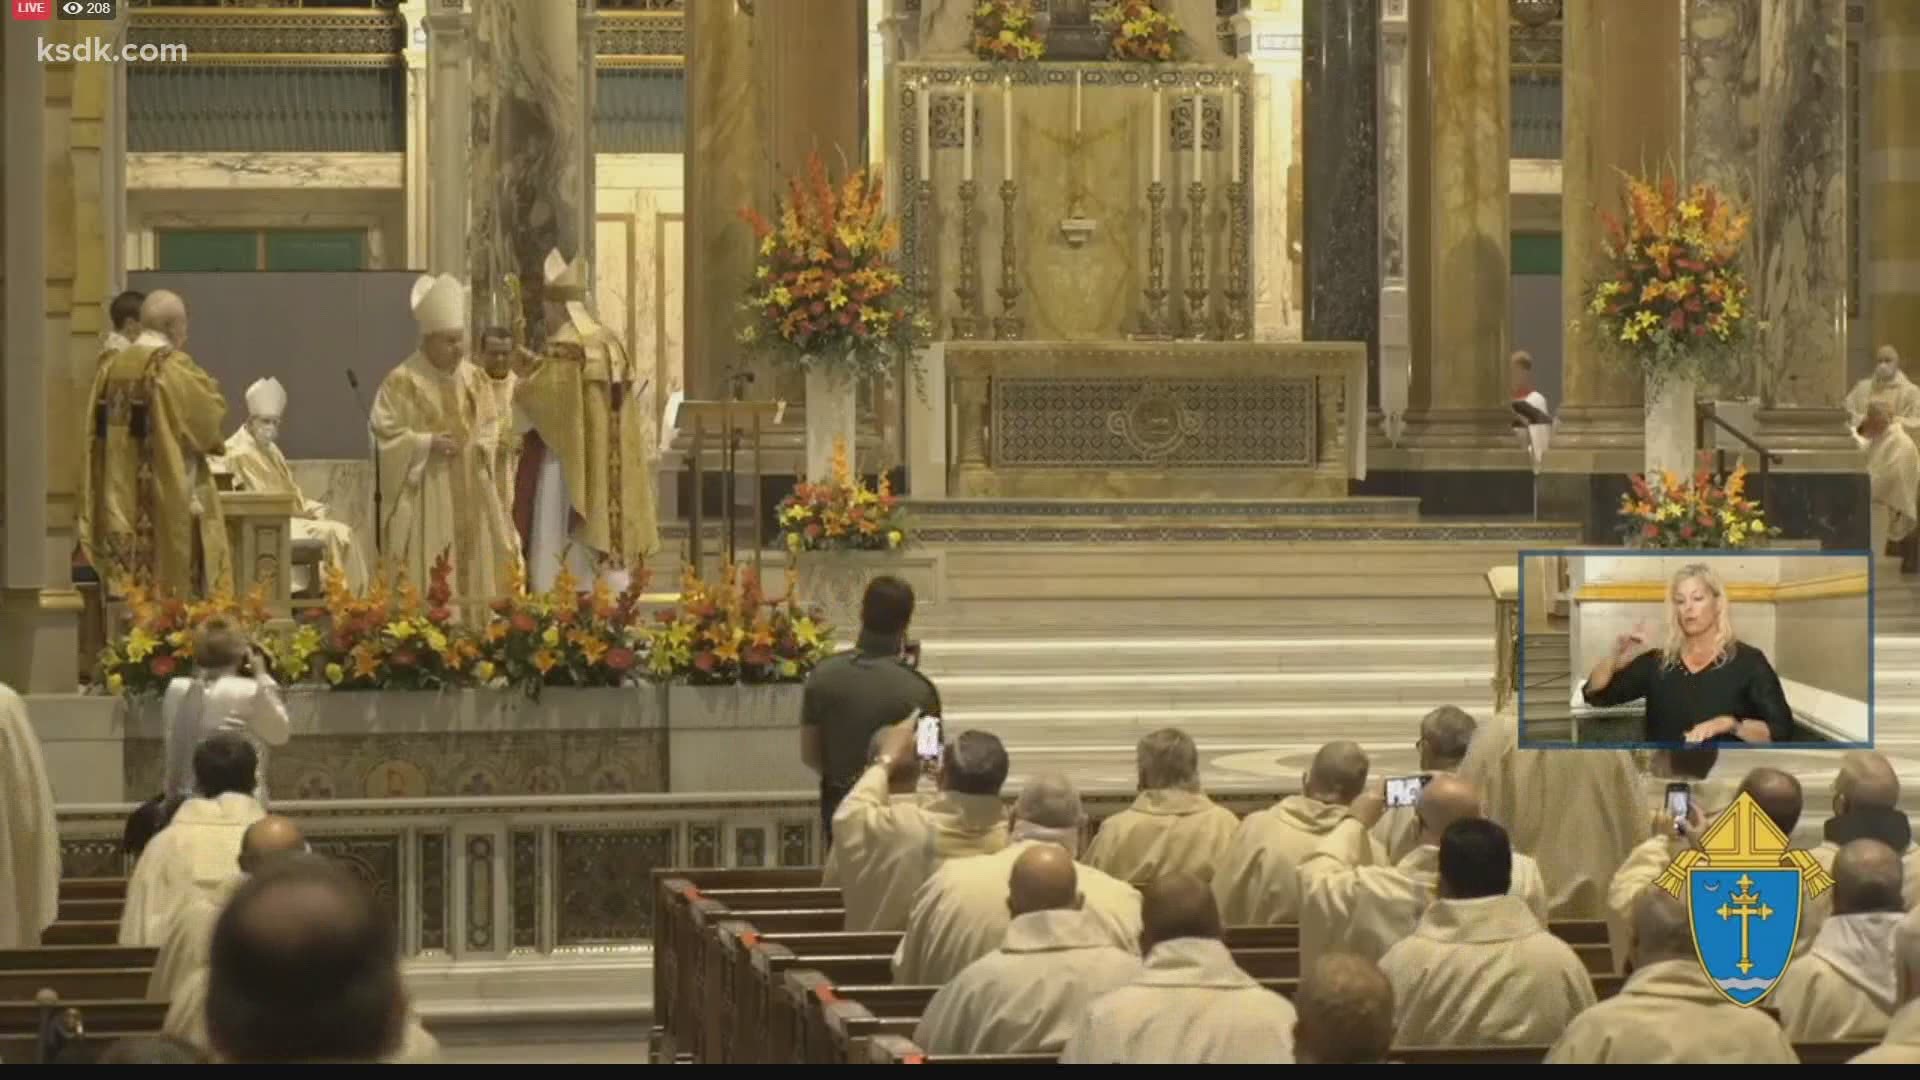 Archdiocese of St. Louis installs new archbishop | www.bagsaleusa.com/product-category/classic-bags/